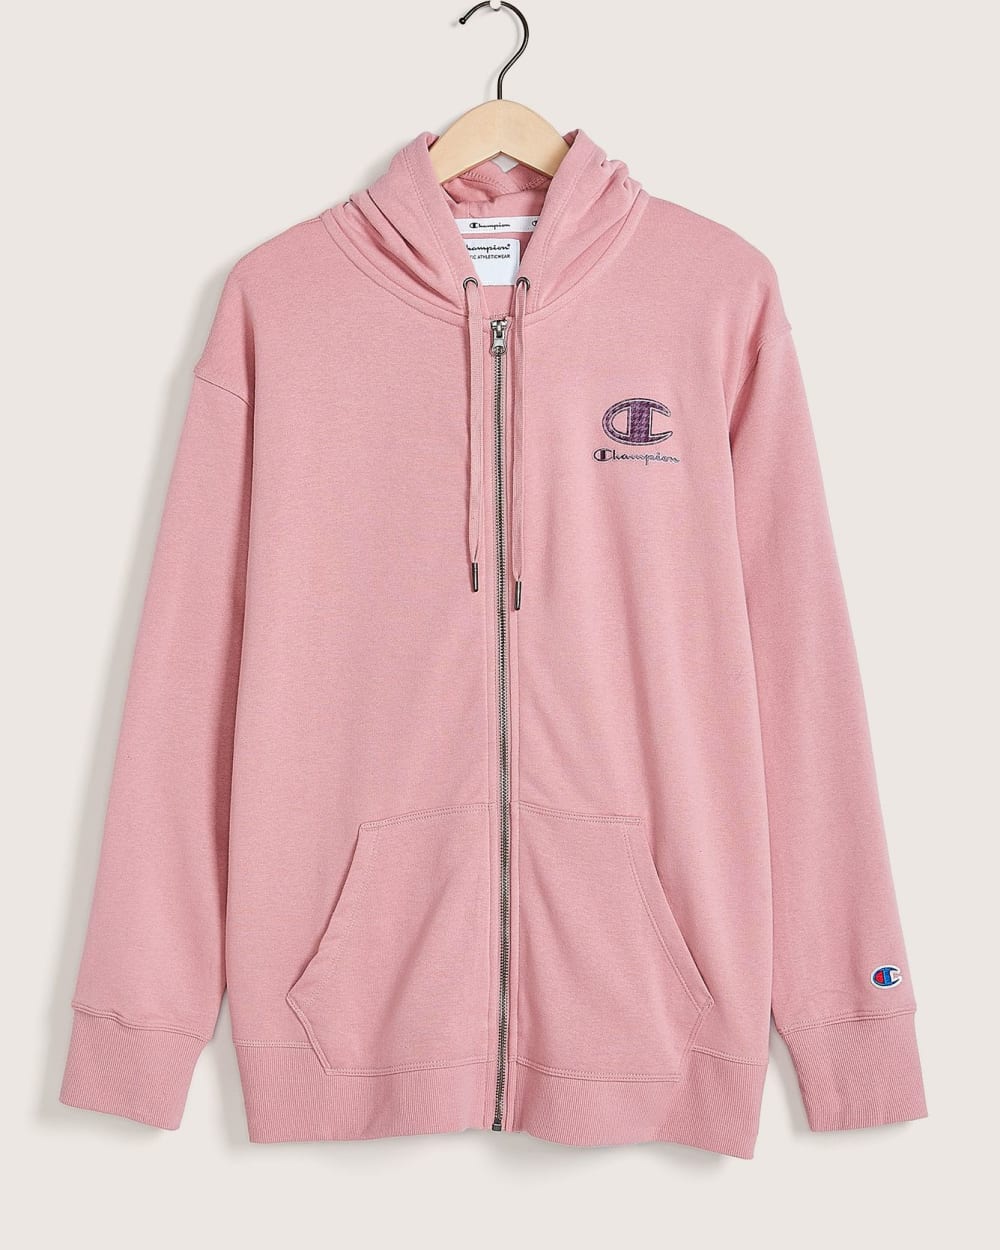 Campus French Terry Zip Hoodie - Champion